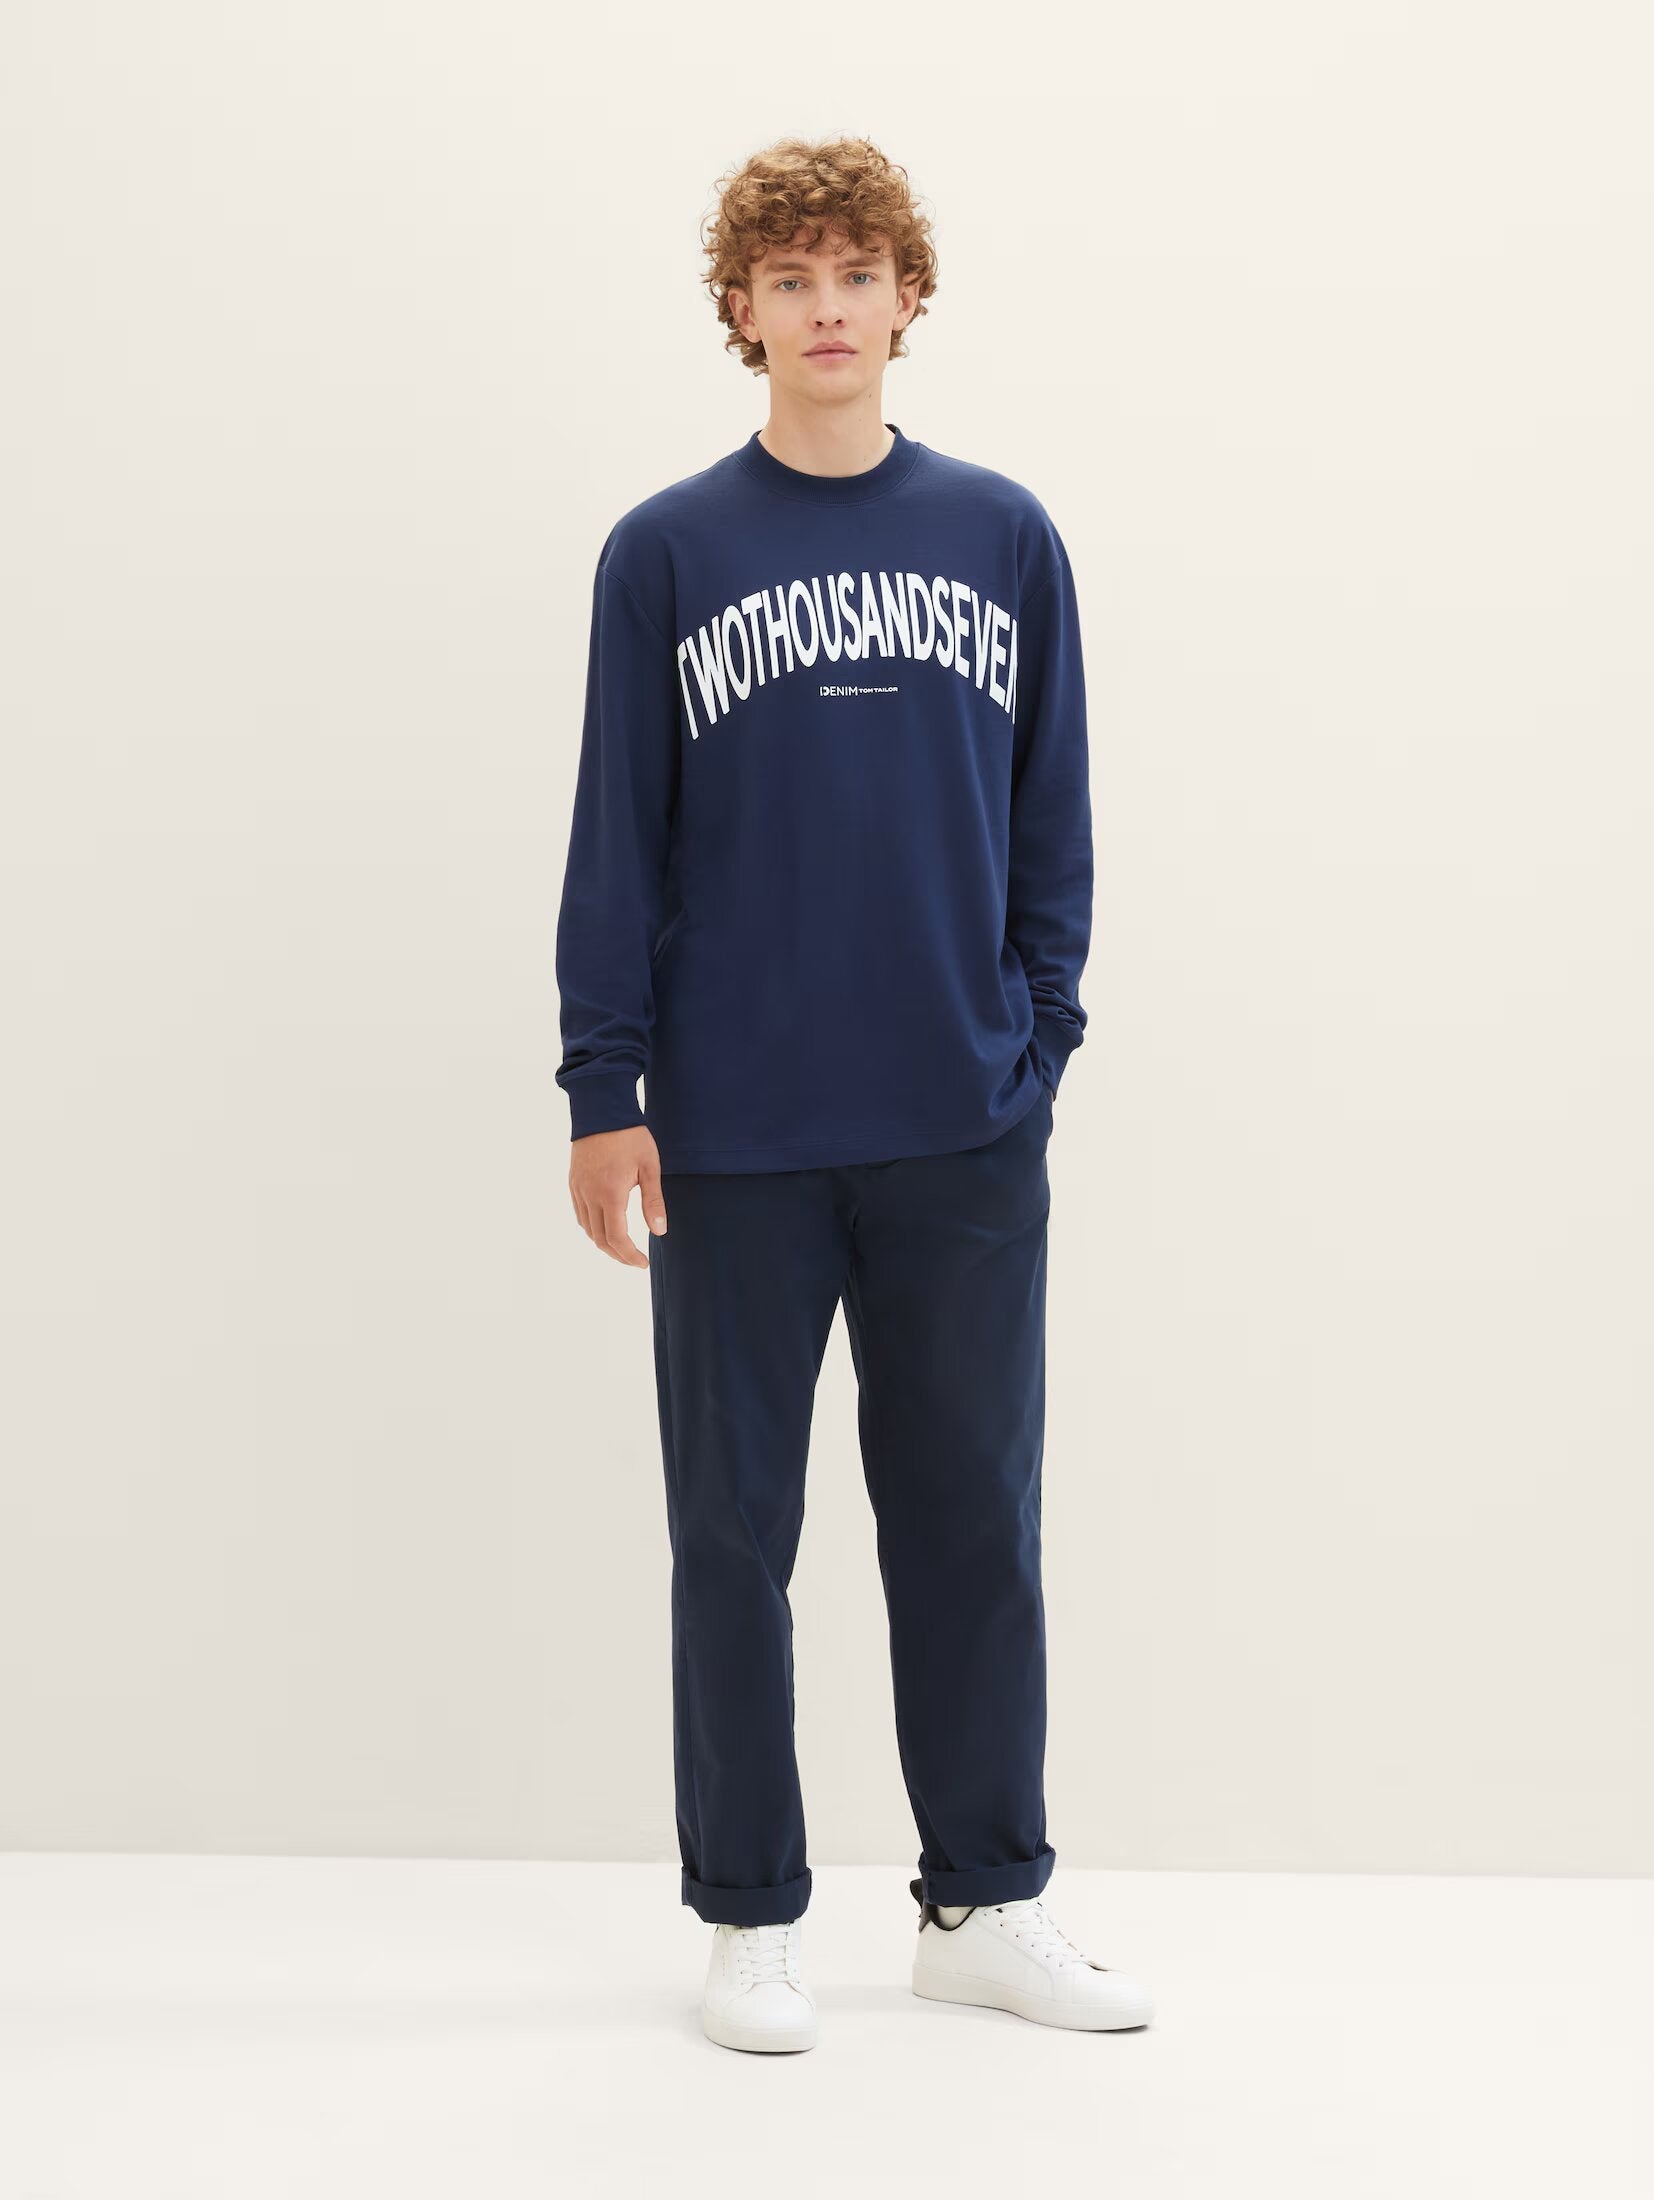 Tom Tailor Dark Blueberry Sweatshirt With a Text Print